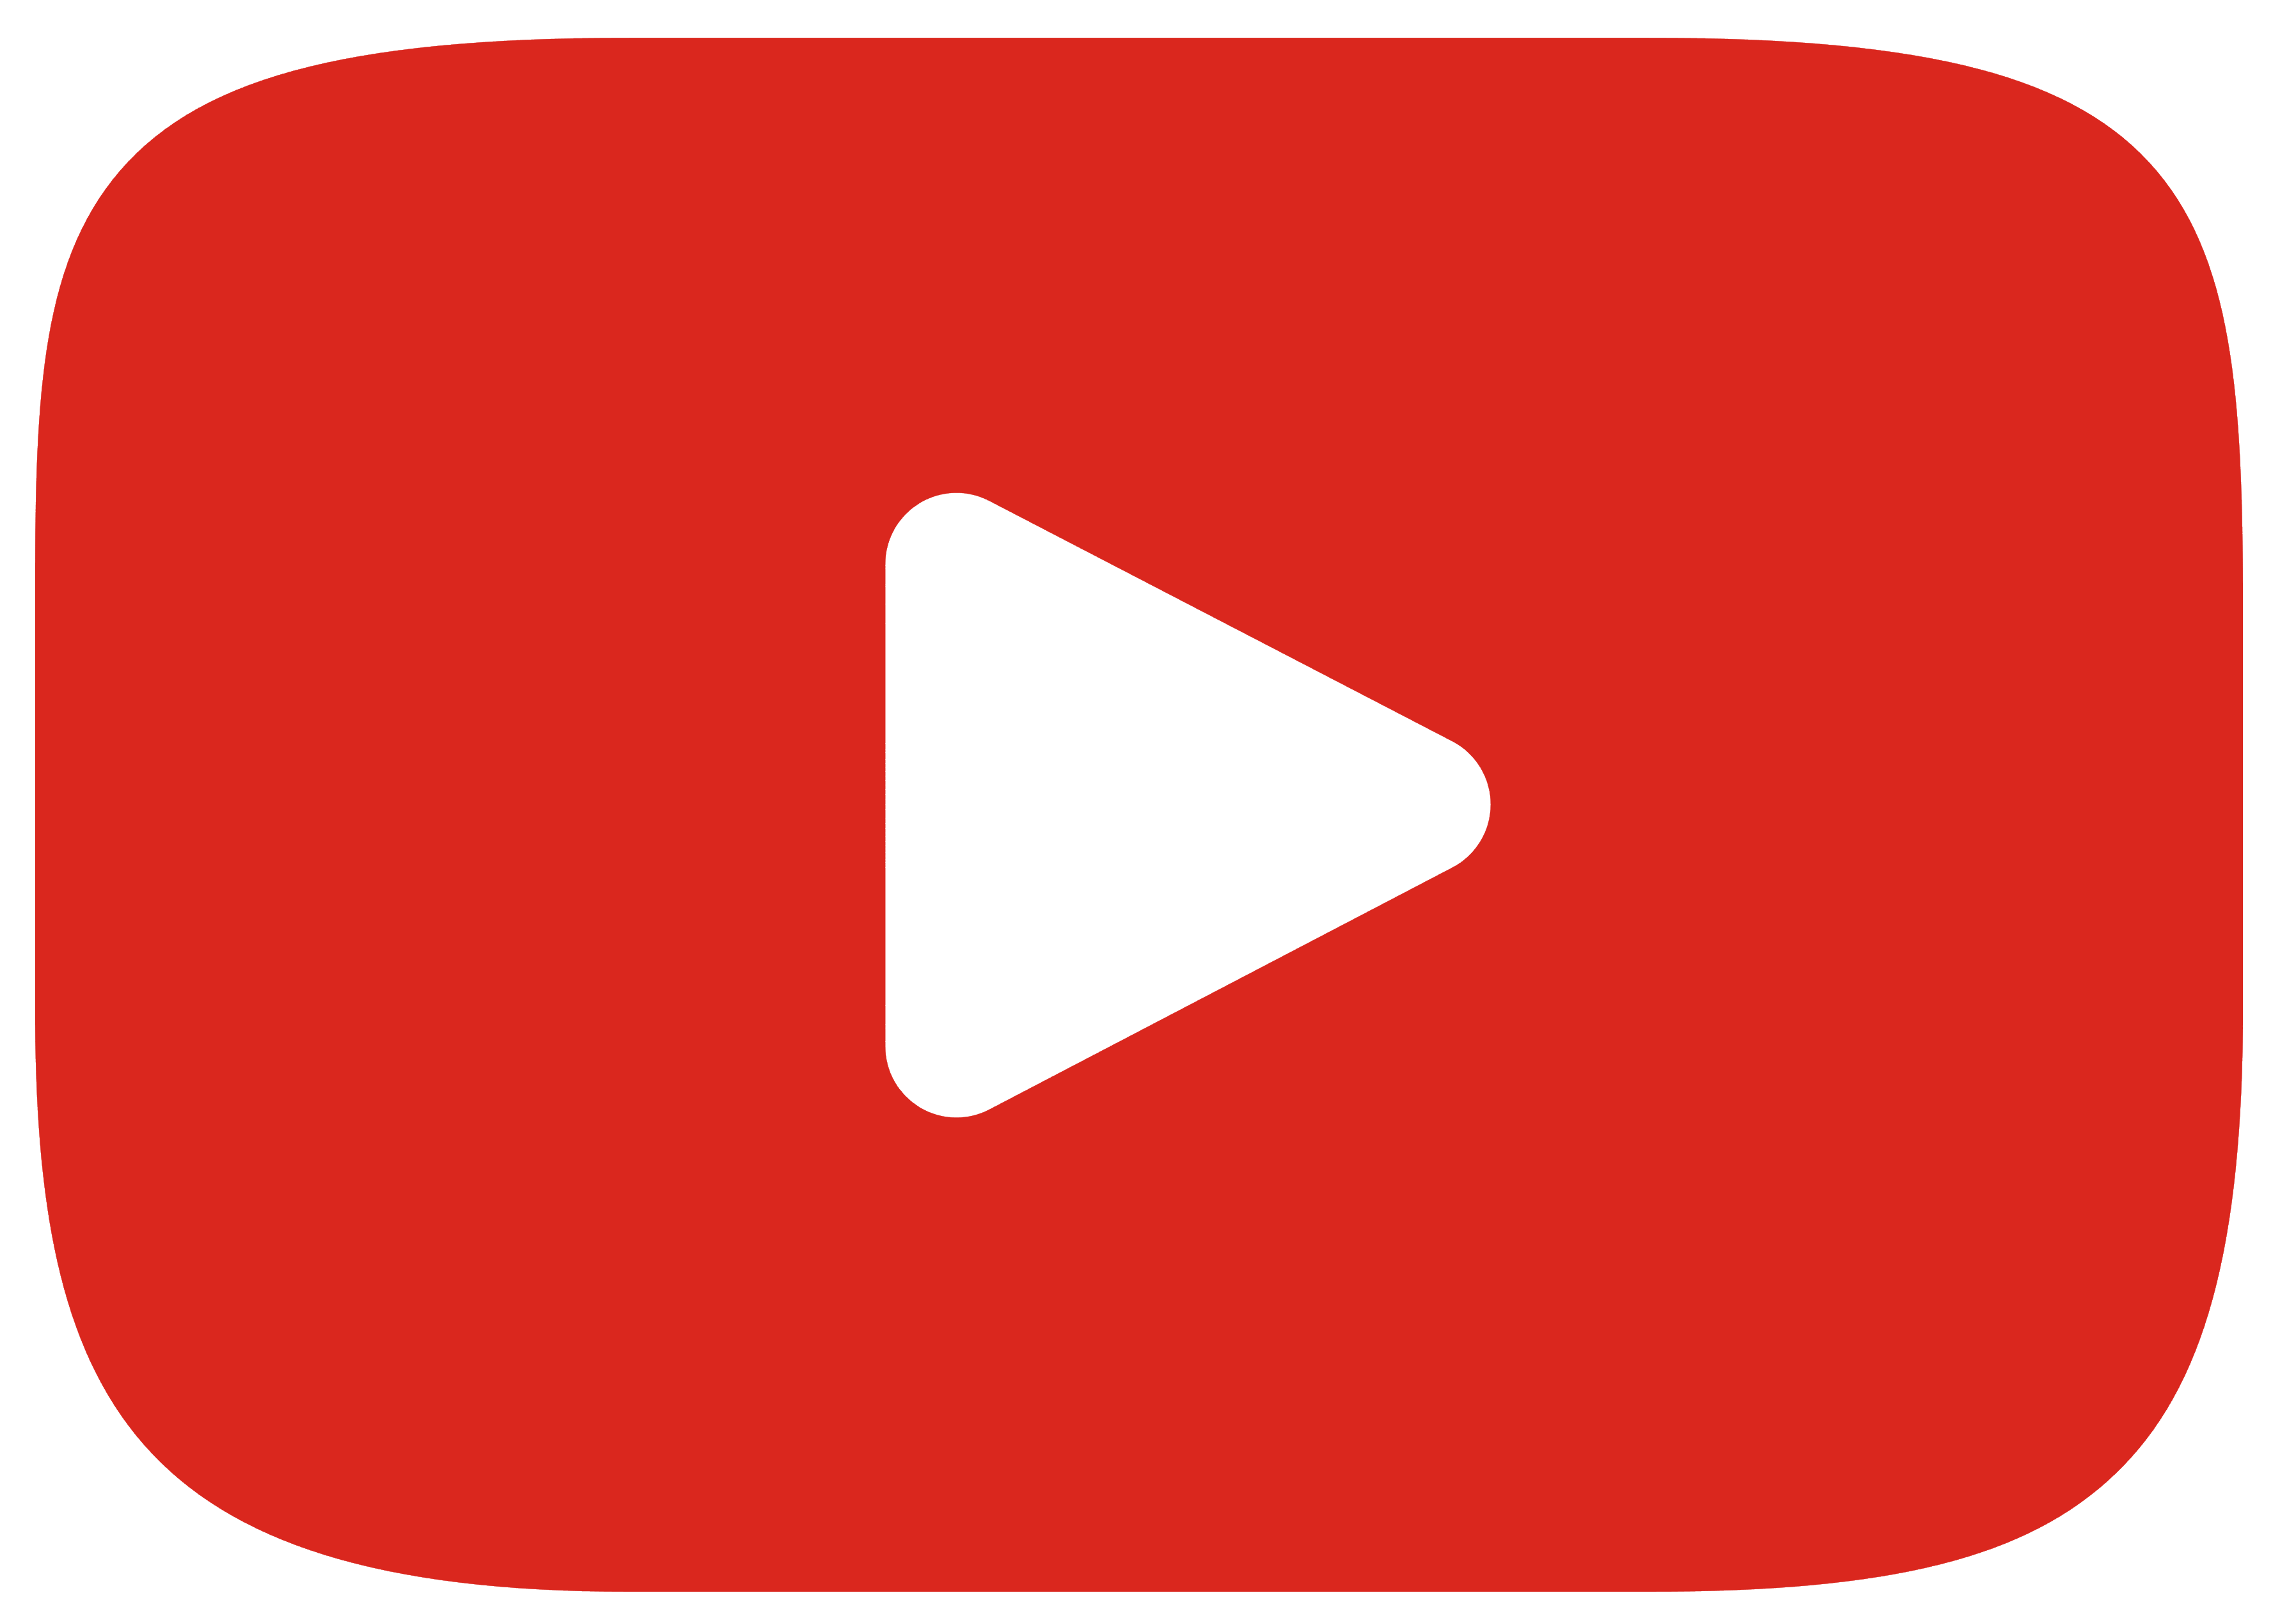 1590430652red-youtube-logo-png-xl